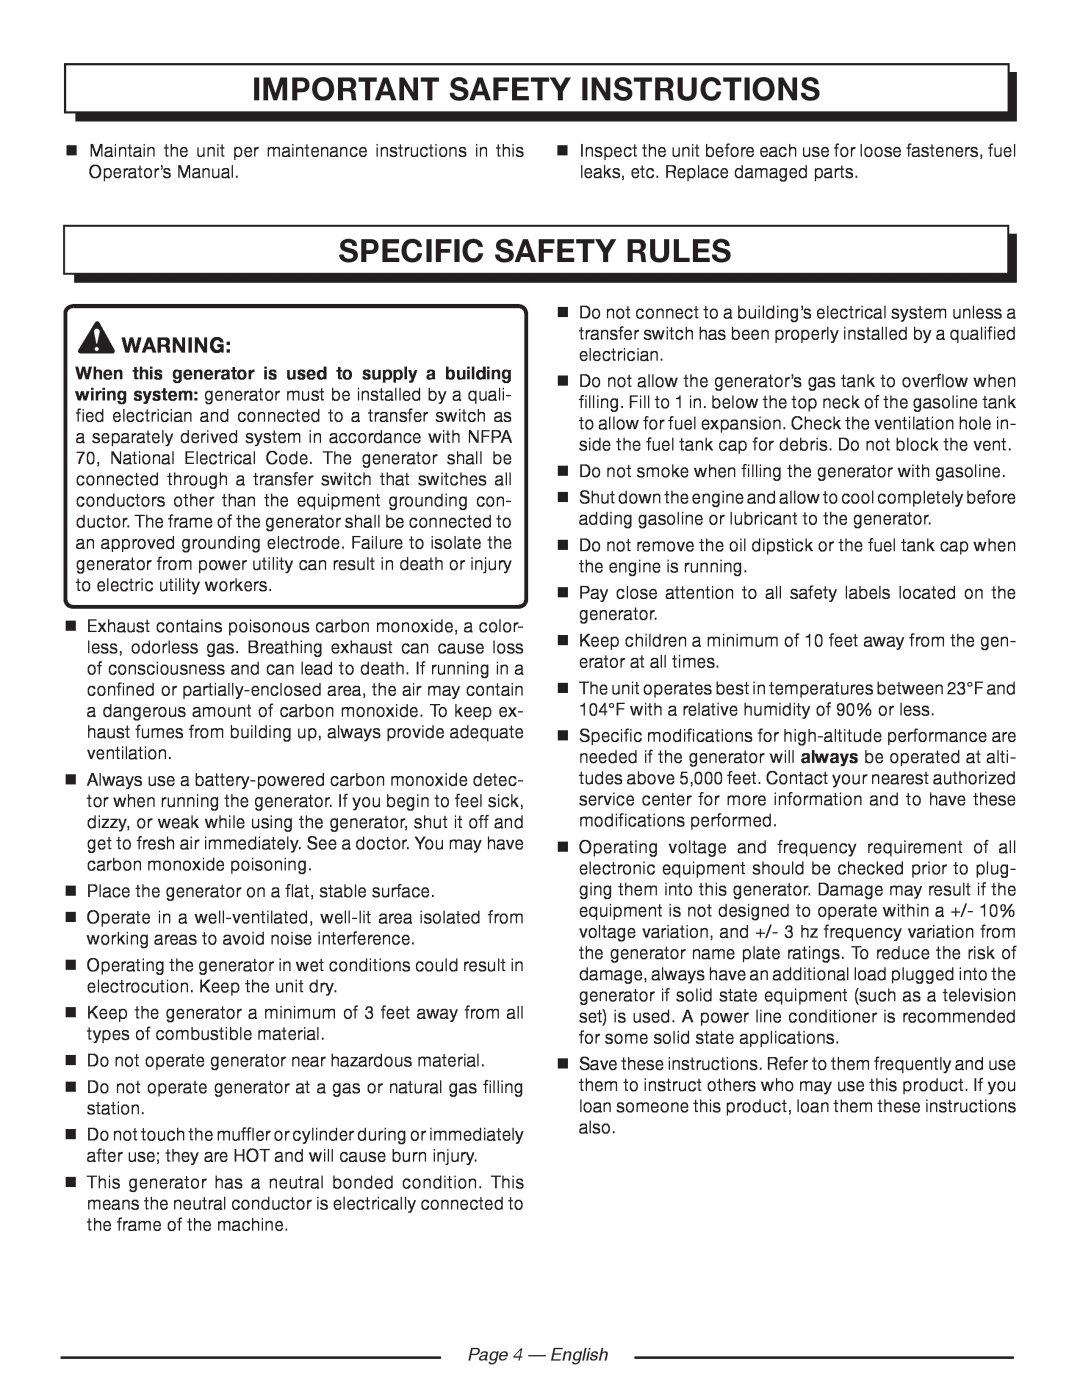 Homelite HG5000 manuel dutilisation Specific Safety Rules, important safety instructions, Page 4 — English 